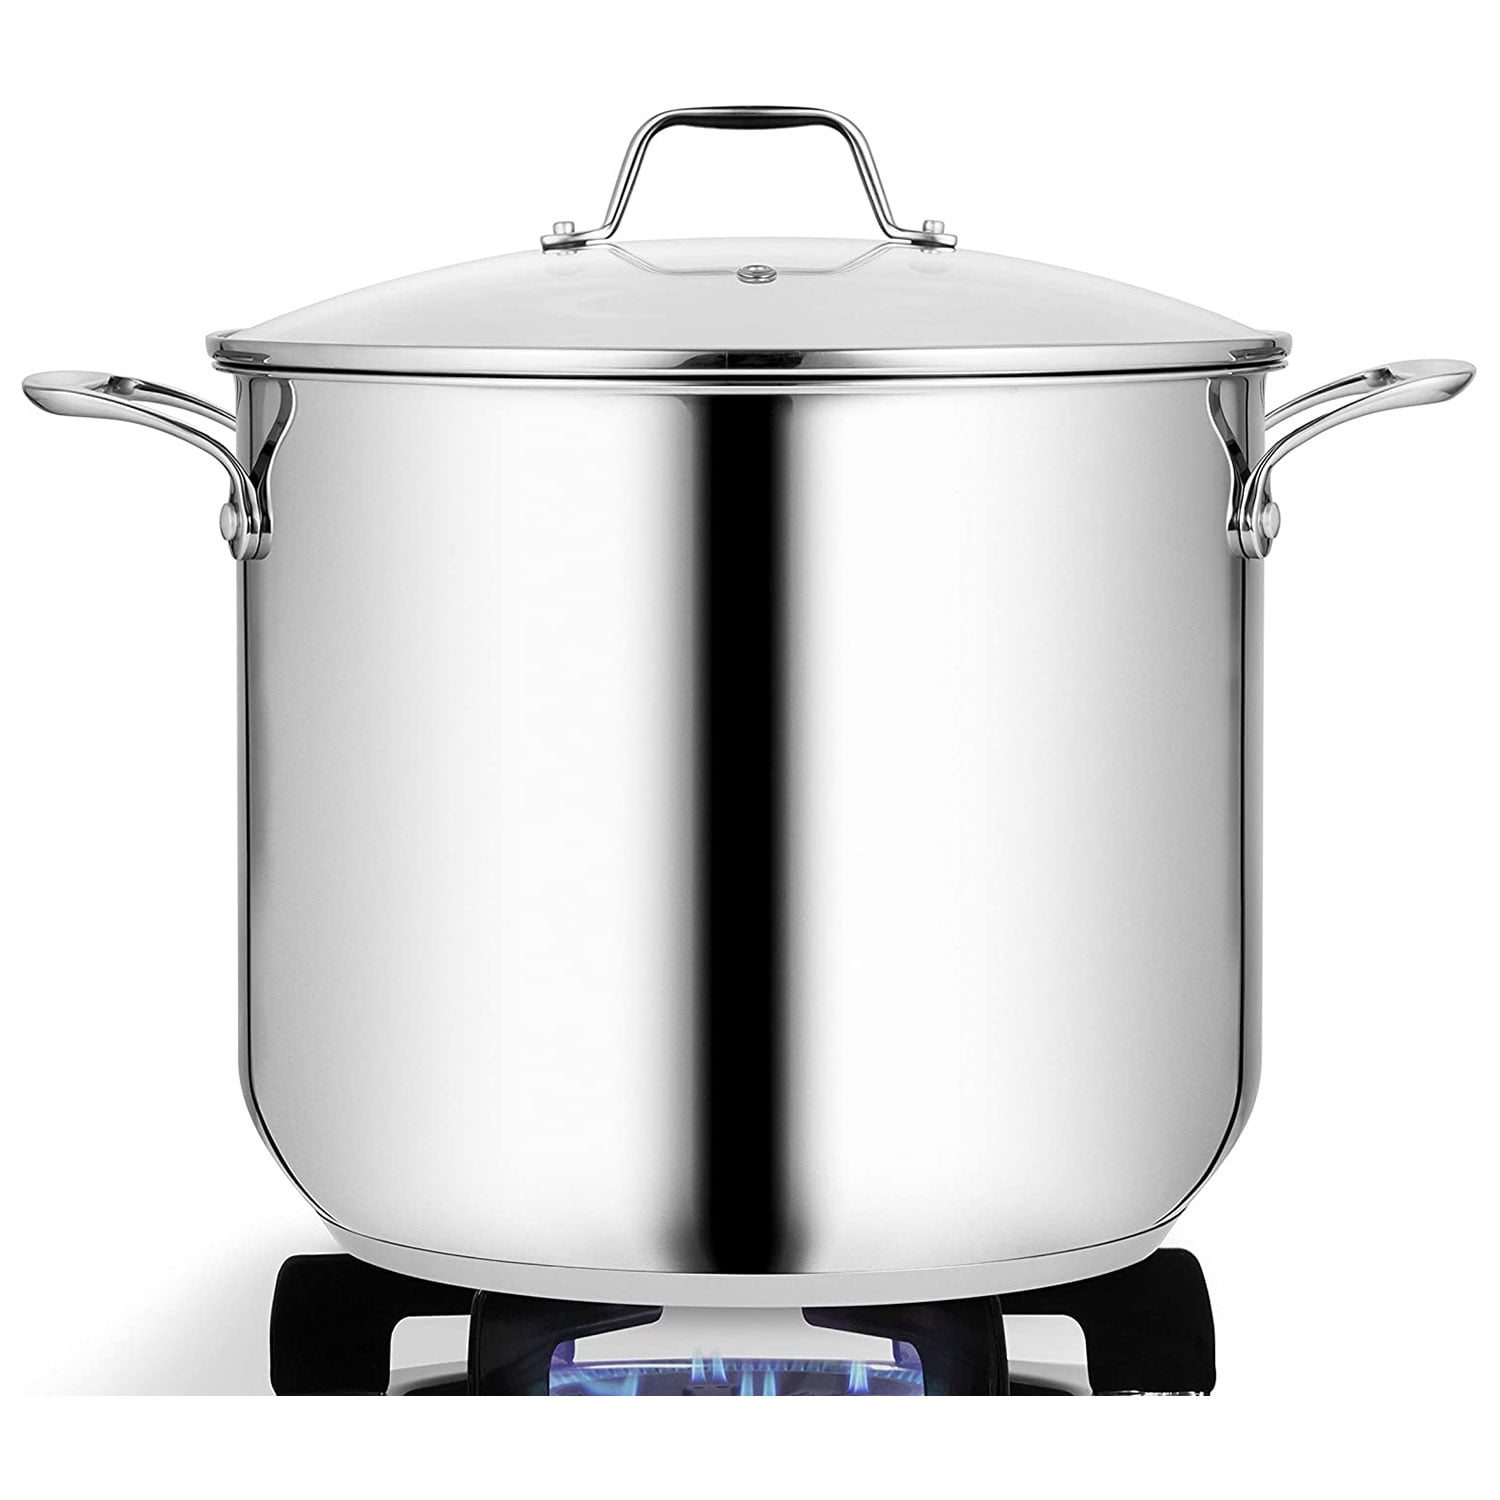 Stainless Steel Aluminum Base Lid 2 in Oster Stock Pot 16 Qt Riveted Handles 